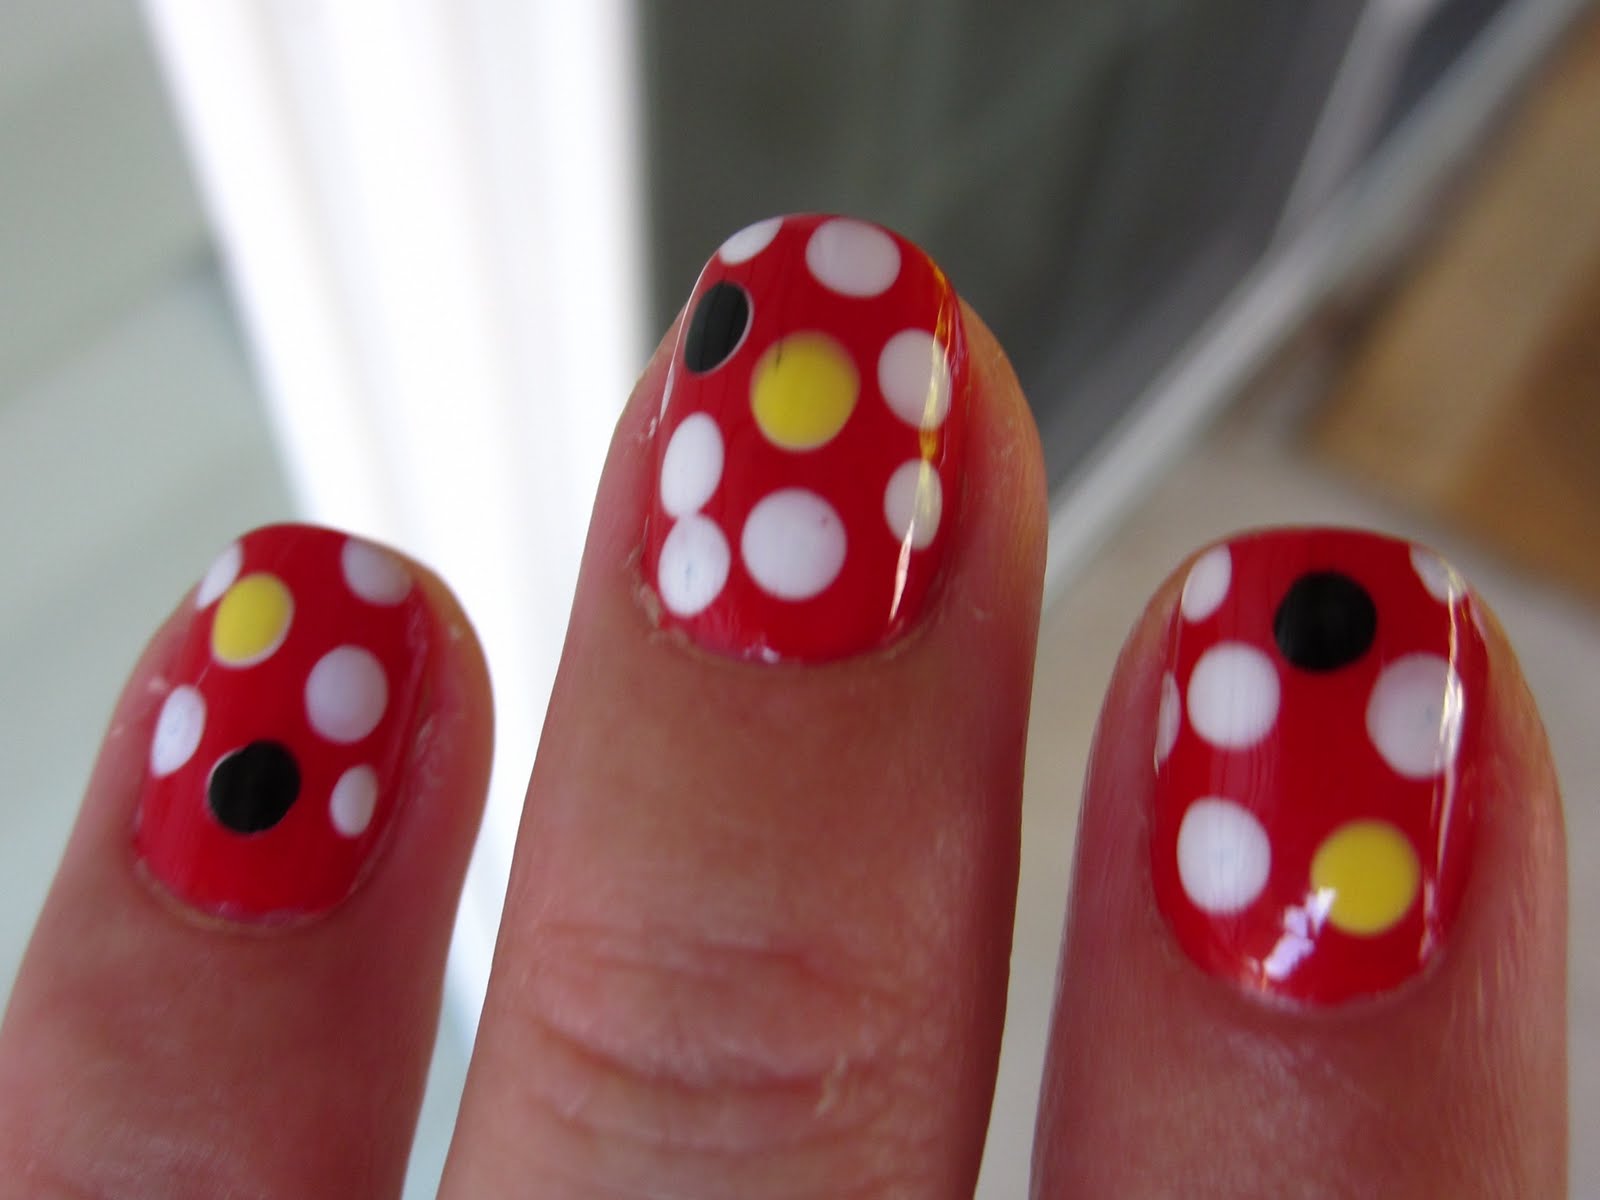 7. Minnie Mouse Nail Art for Beginners - wide 7